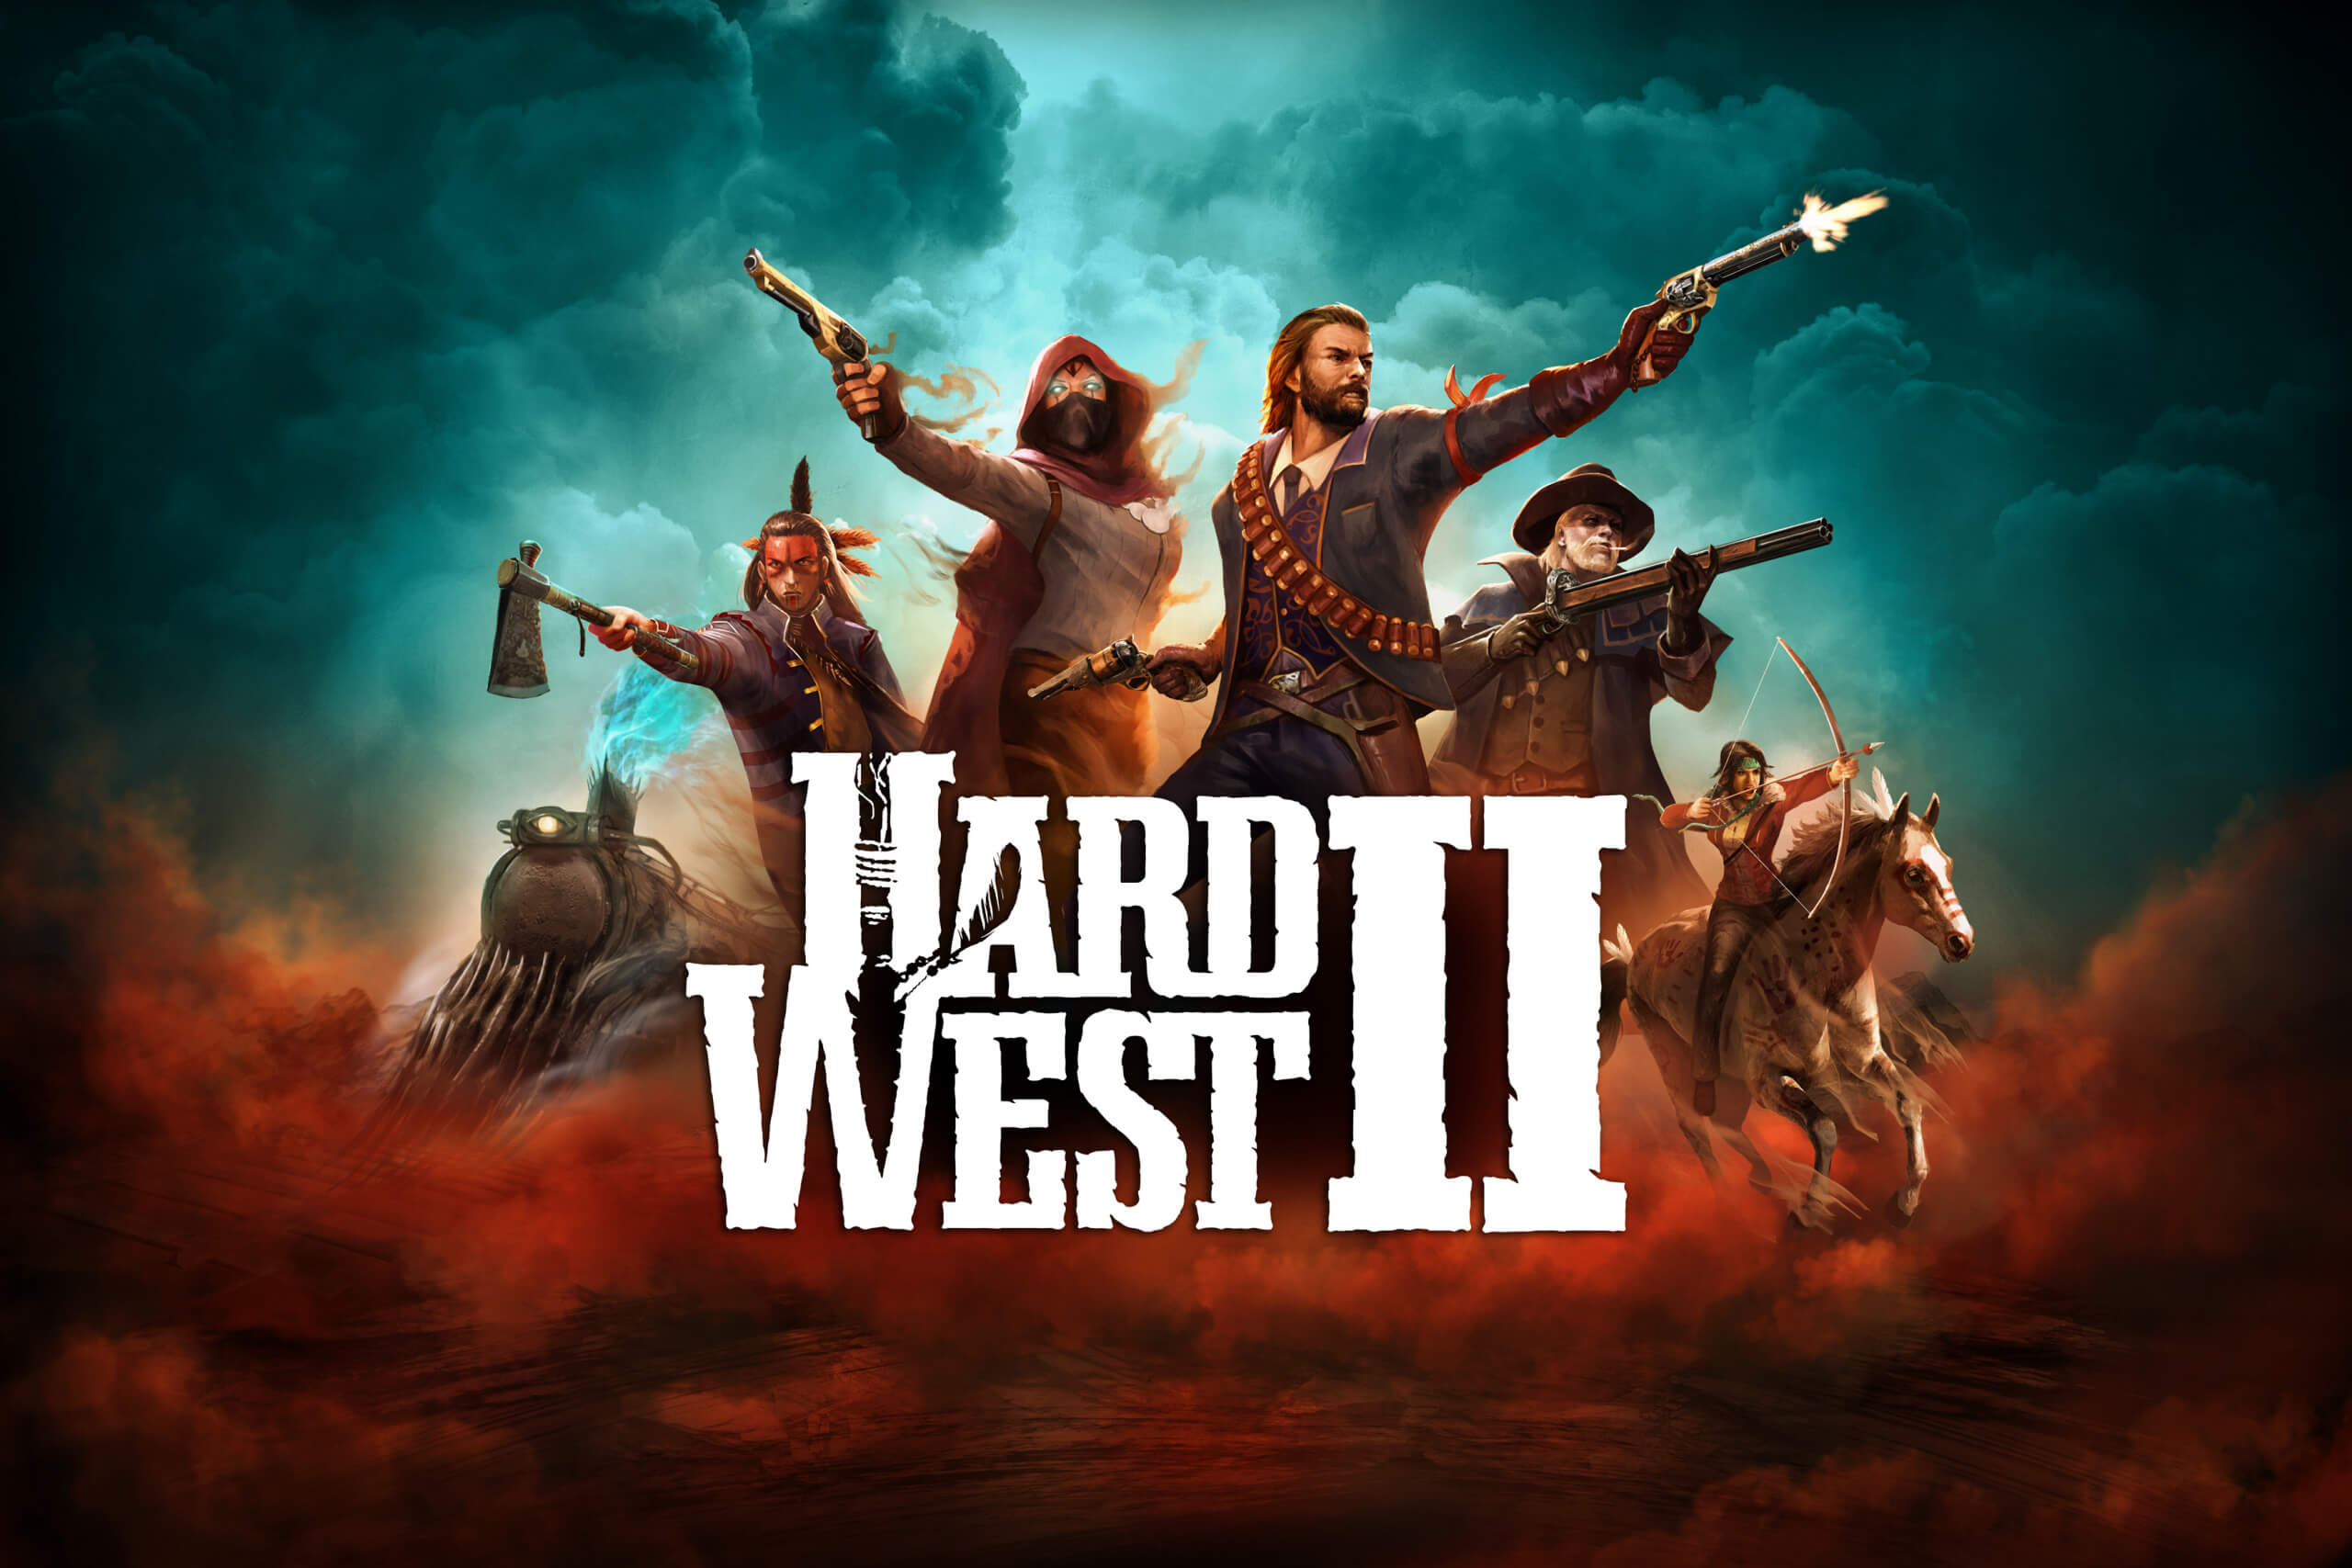 Lead a Supernatural Posse Across the American Frontier in Hard